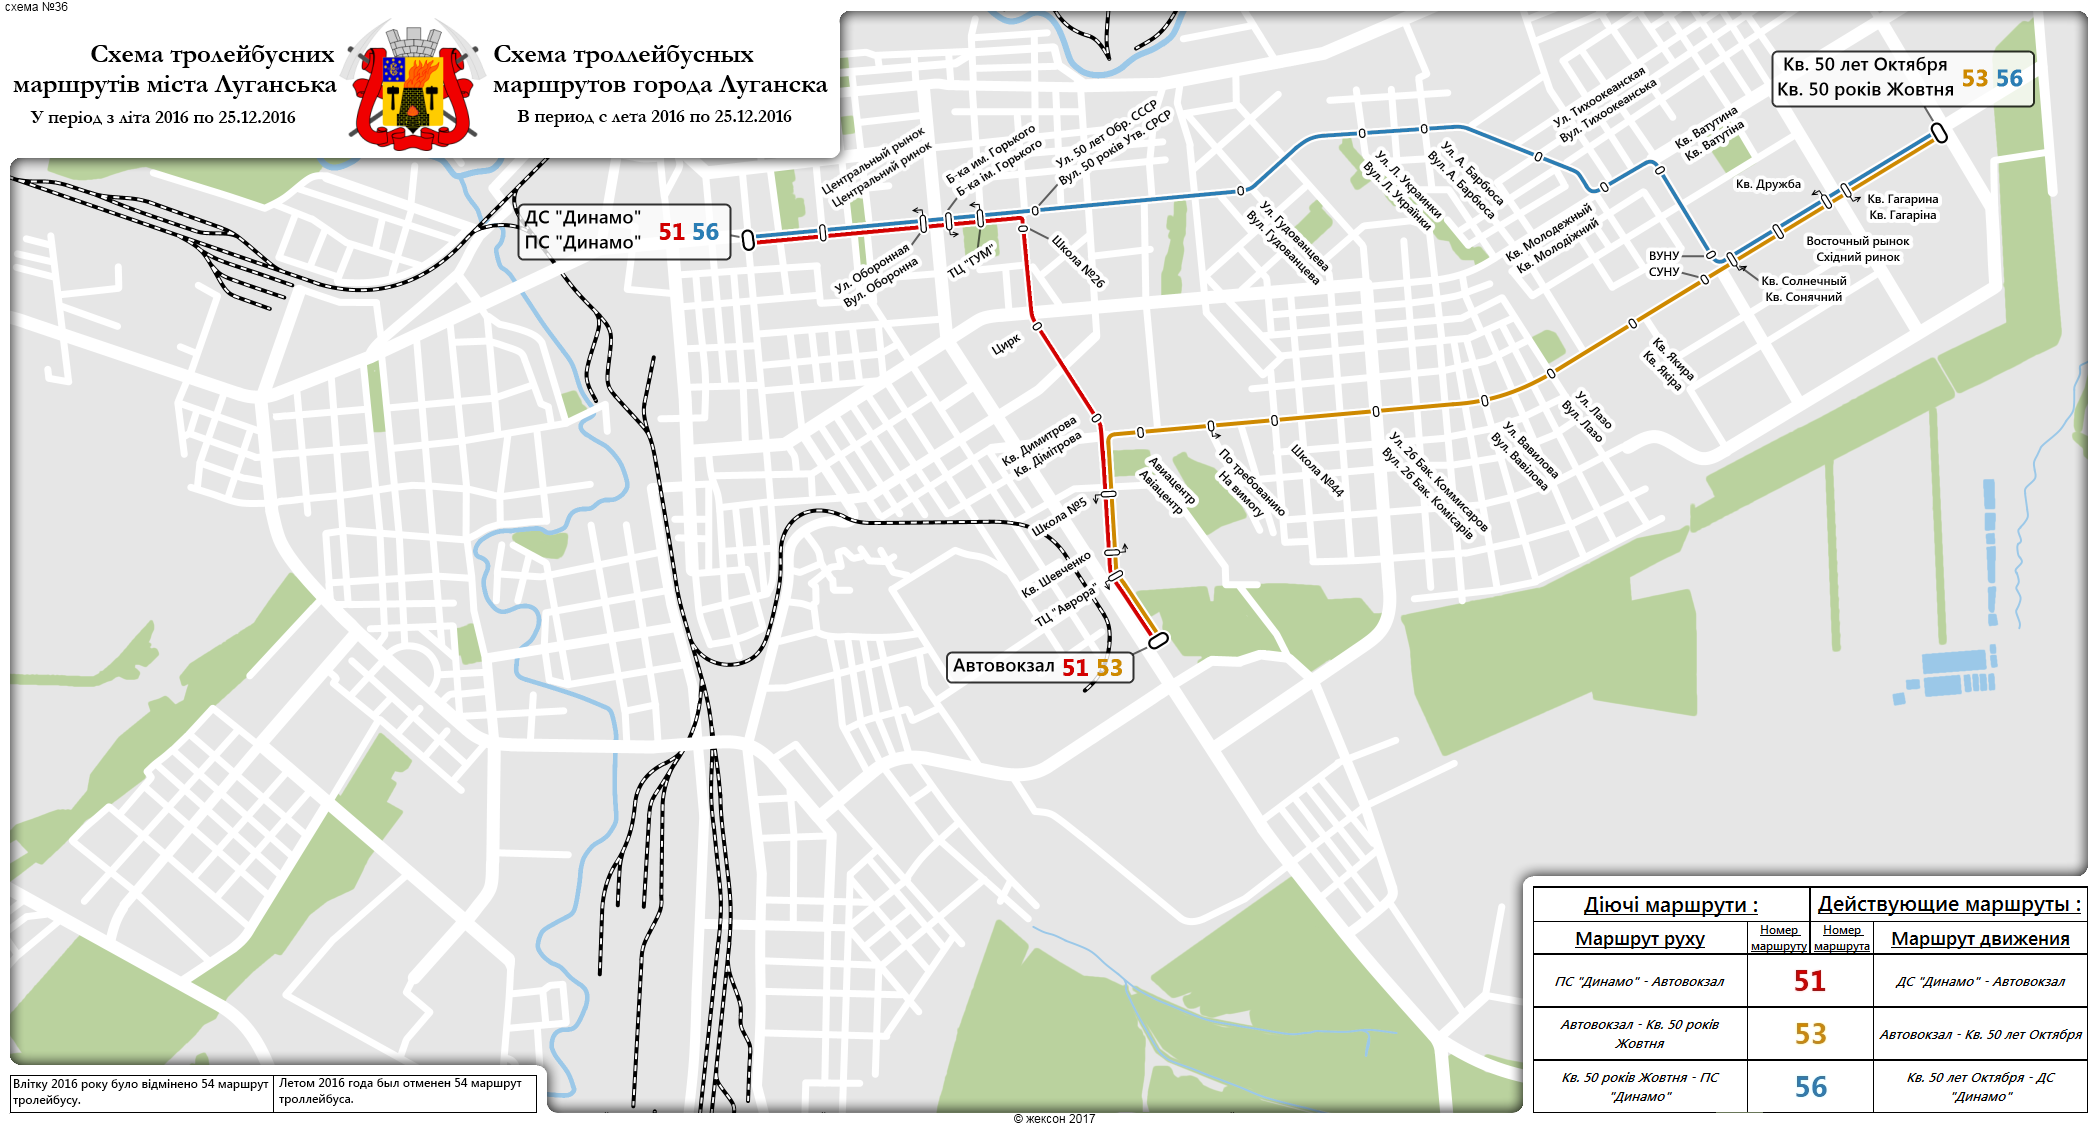 Luhansk — Historic Mas of Trolleybus Routes